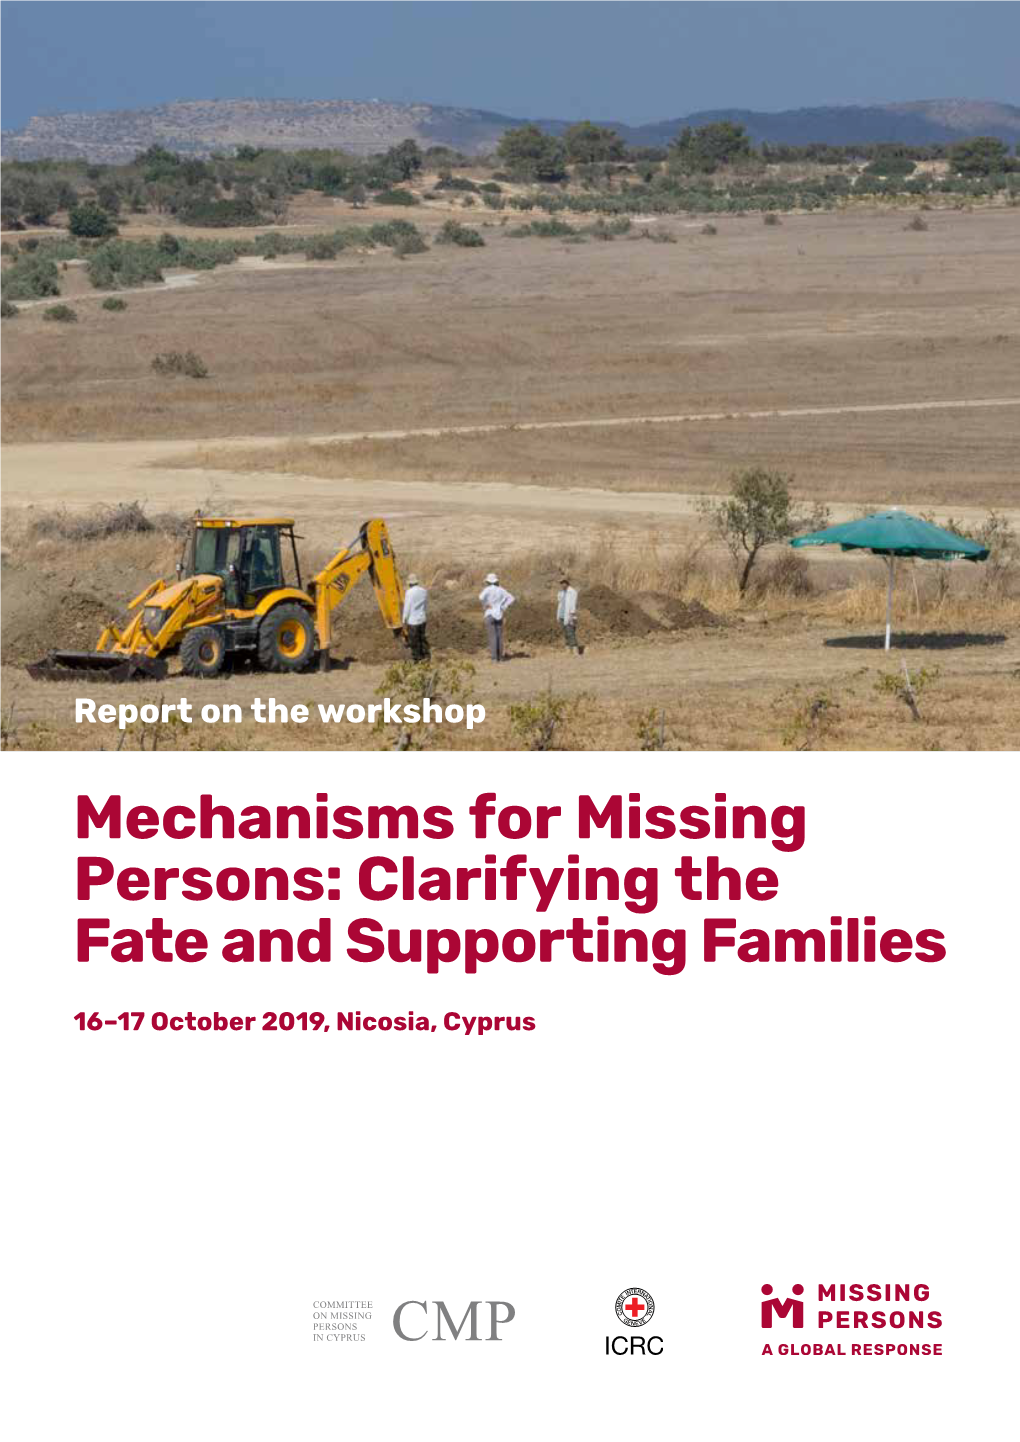 Mechanisms for Missing Persons: Clarifying the Fate and Supporting Families